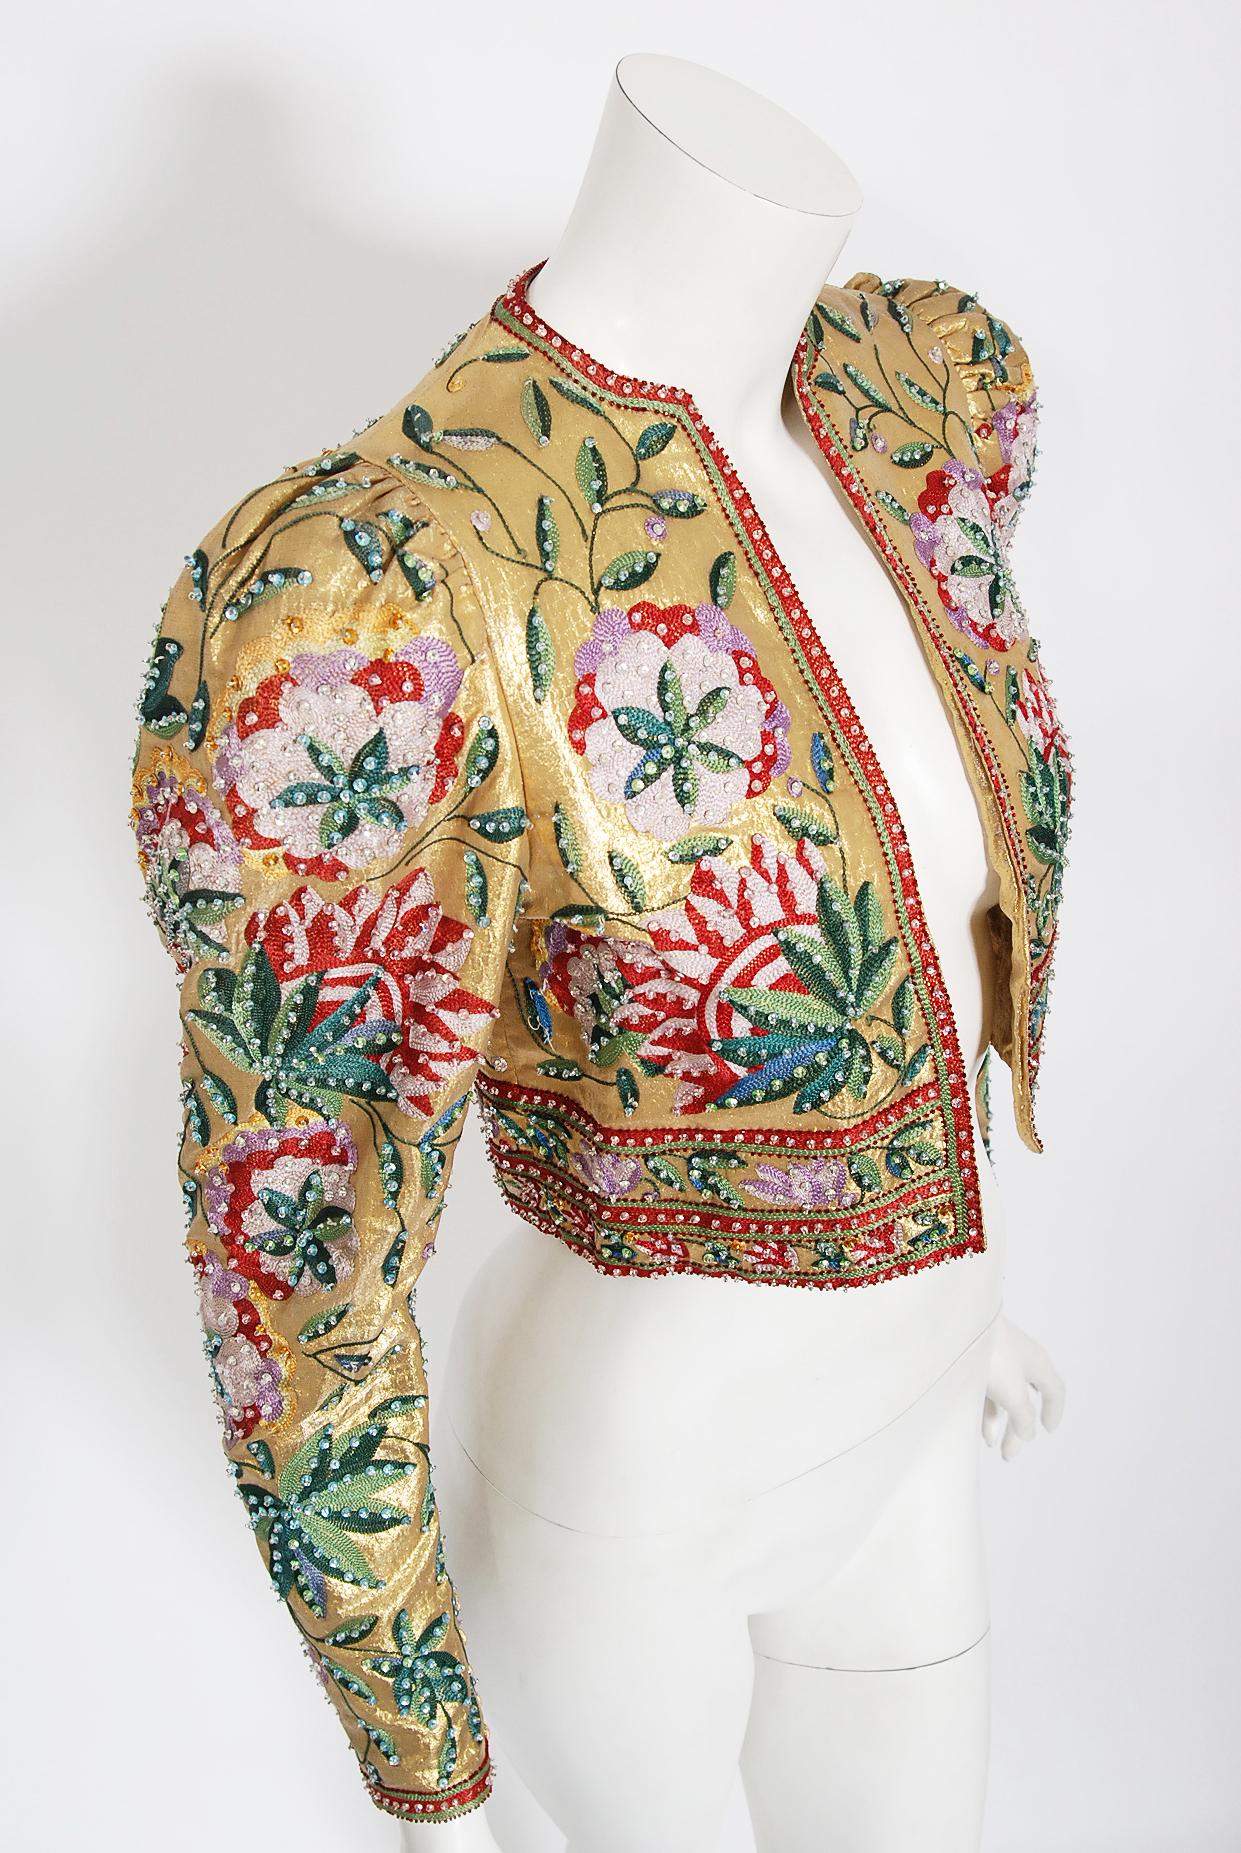 An extremely gorgeous one-of-a-kind Lanvin Haute Couture metallic gold lamé cropped jacket dating back to the late 1970's. The fabric itself is a masterpiece; sparkling gold snakeskin patterned lamé lavishly embroidered with colorful chain-stitch